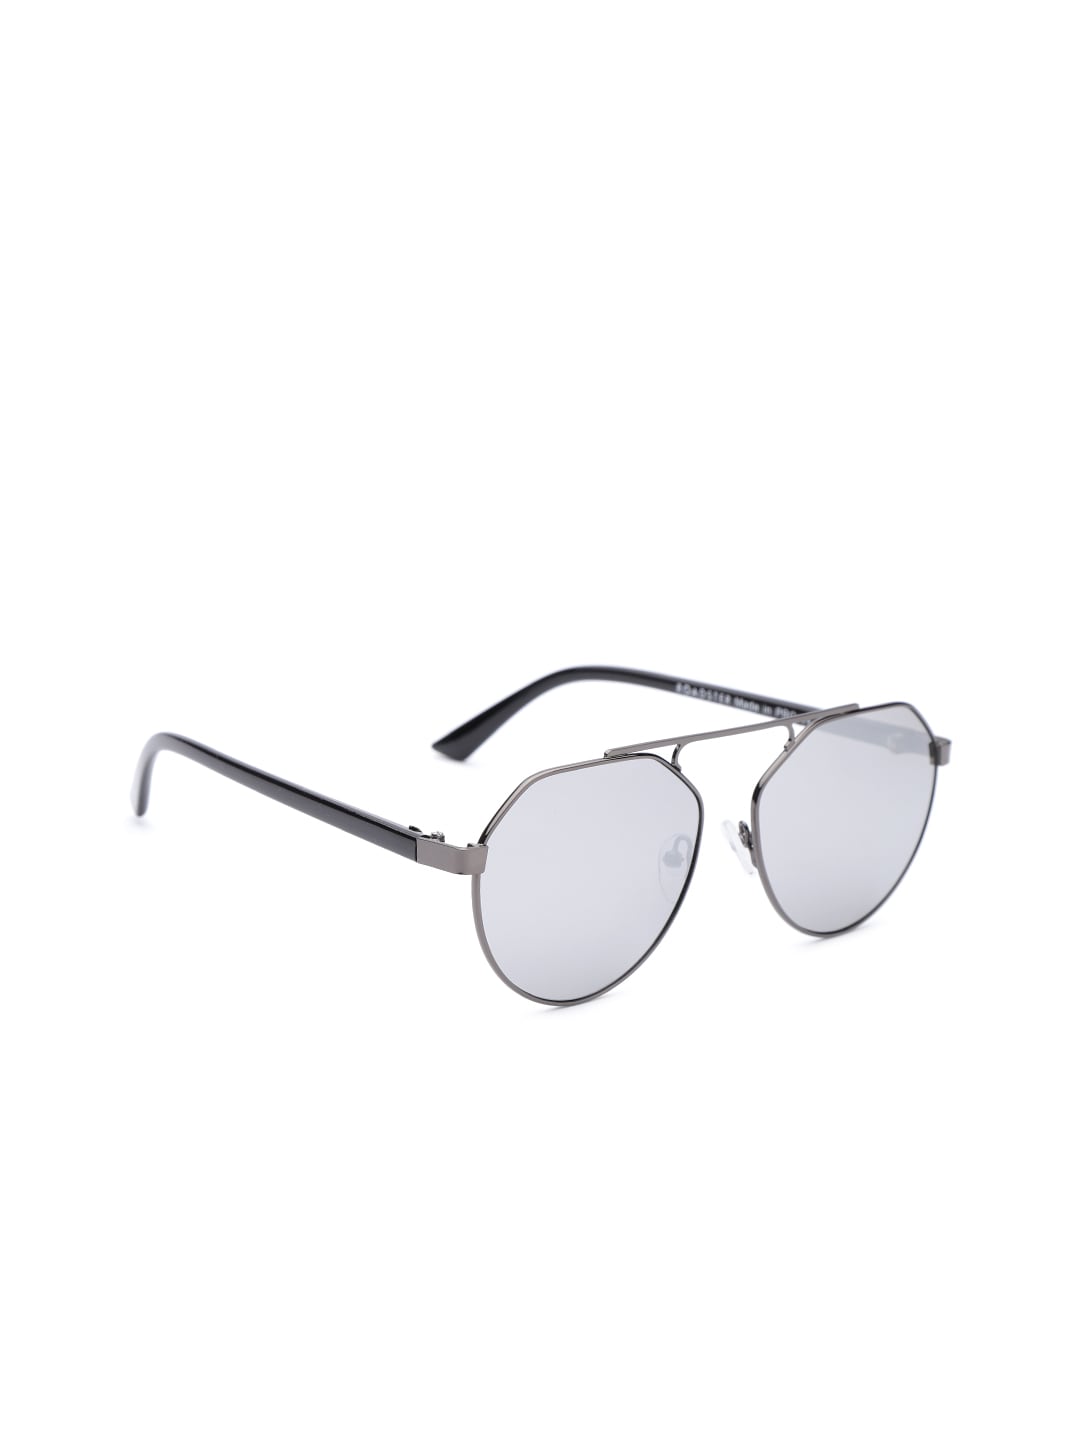 Roadster Unisex Mirrored Oval Sunglasses MFB-PN-PS-T10260 Price in India